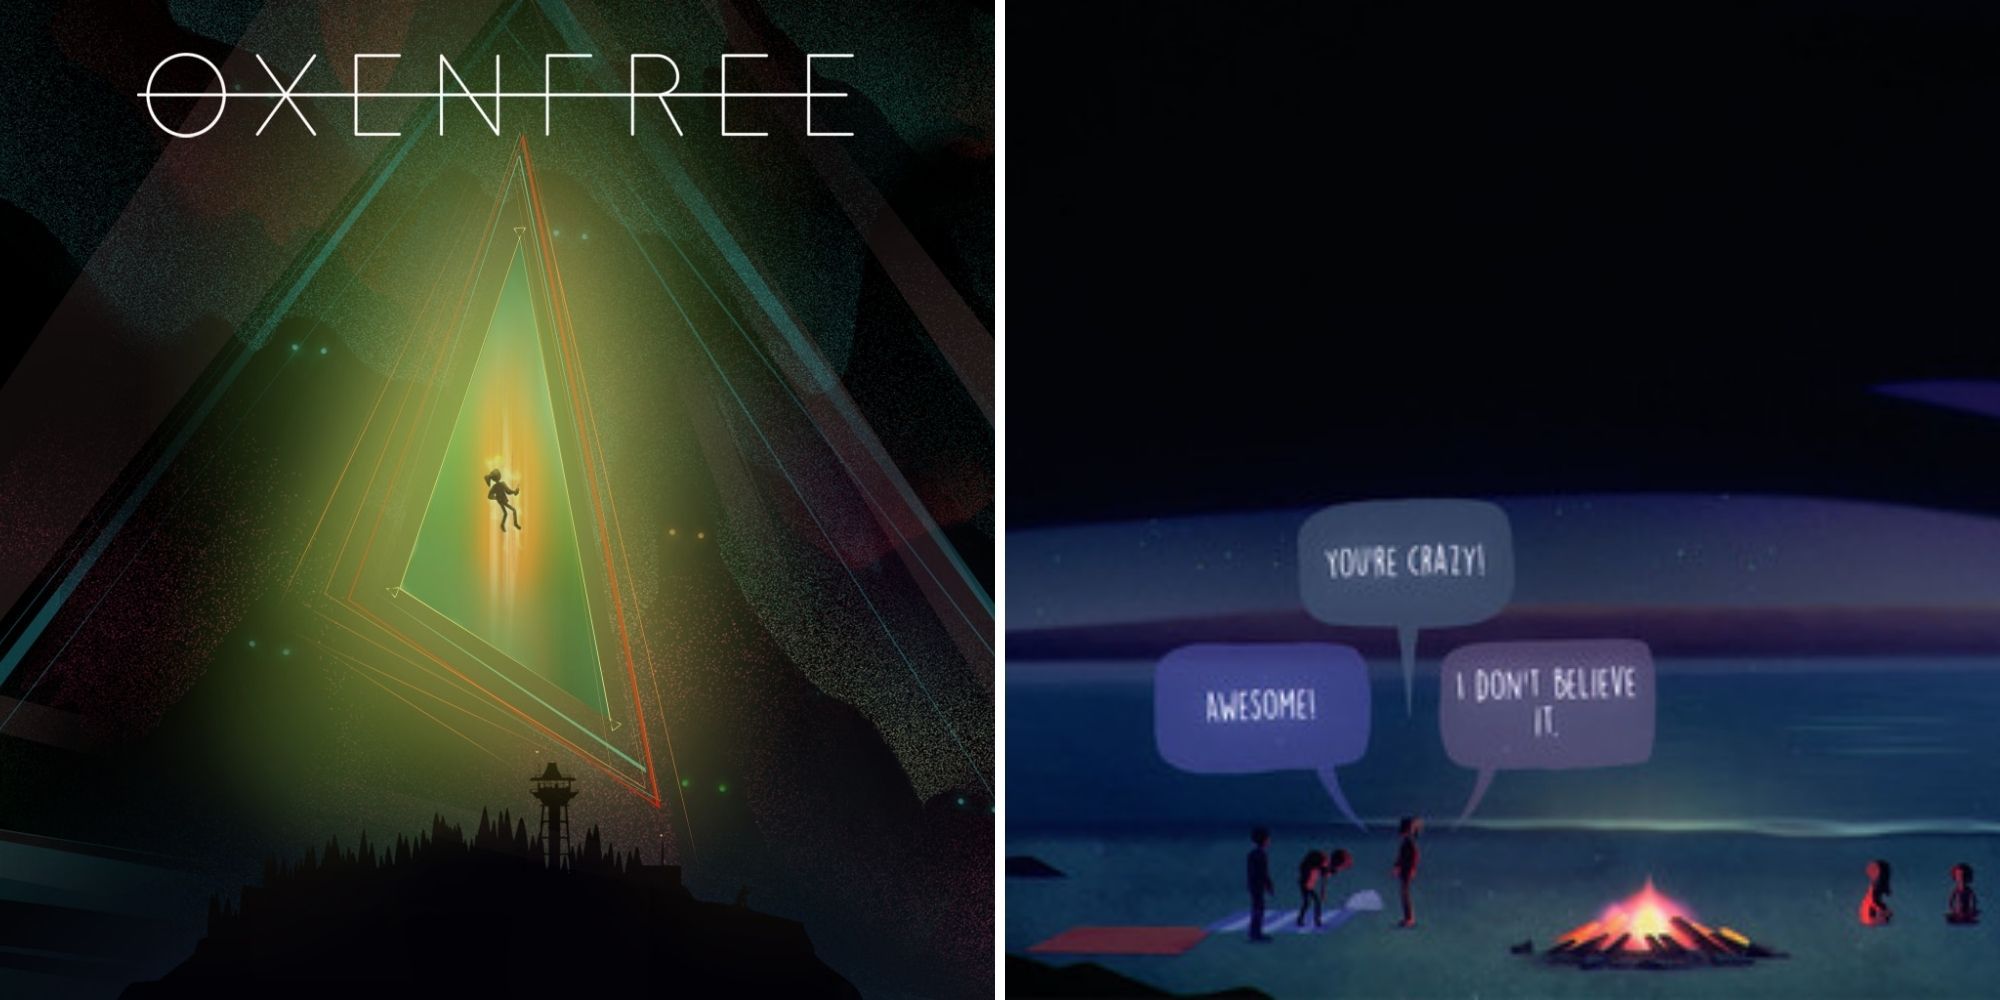 Oxenfree official playstation image and the characters by a fire on the beach with dialogue choices